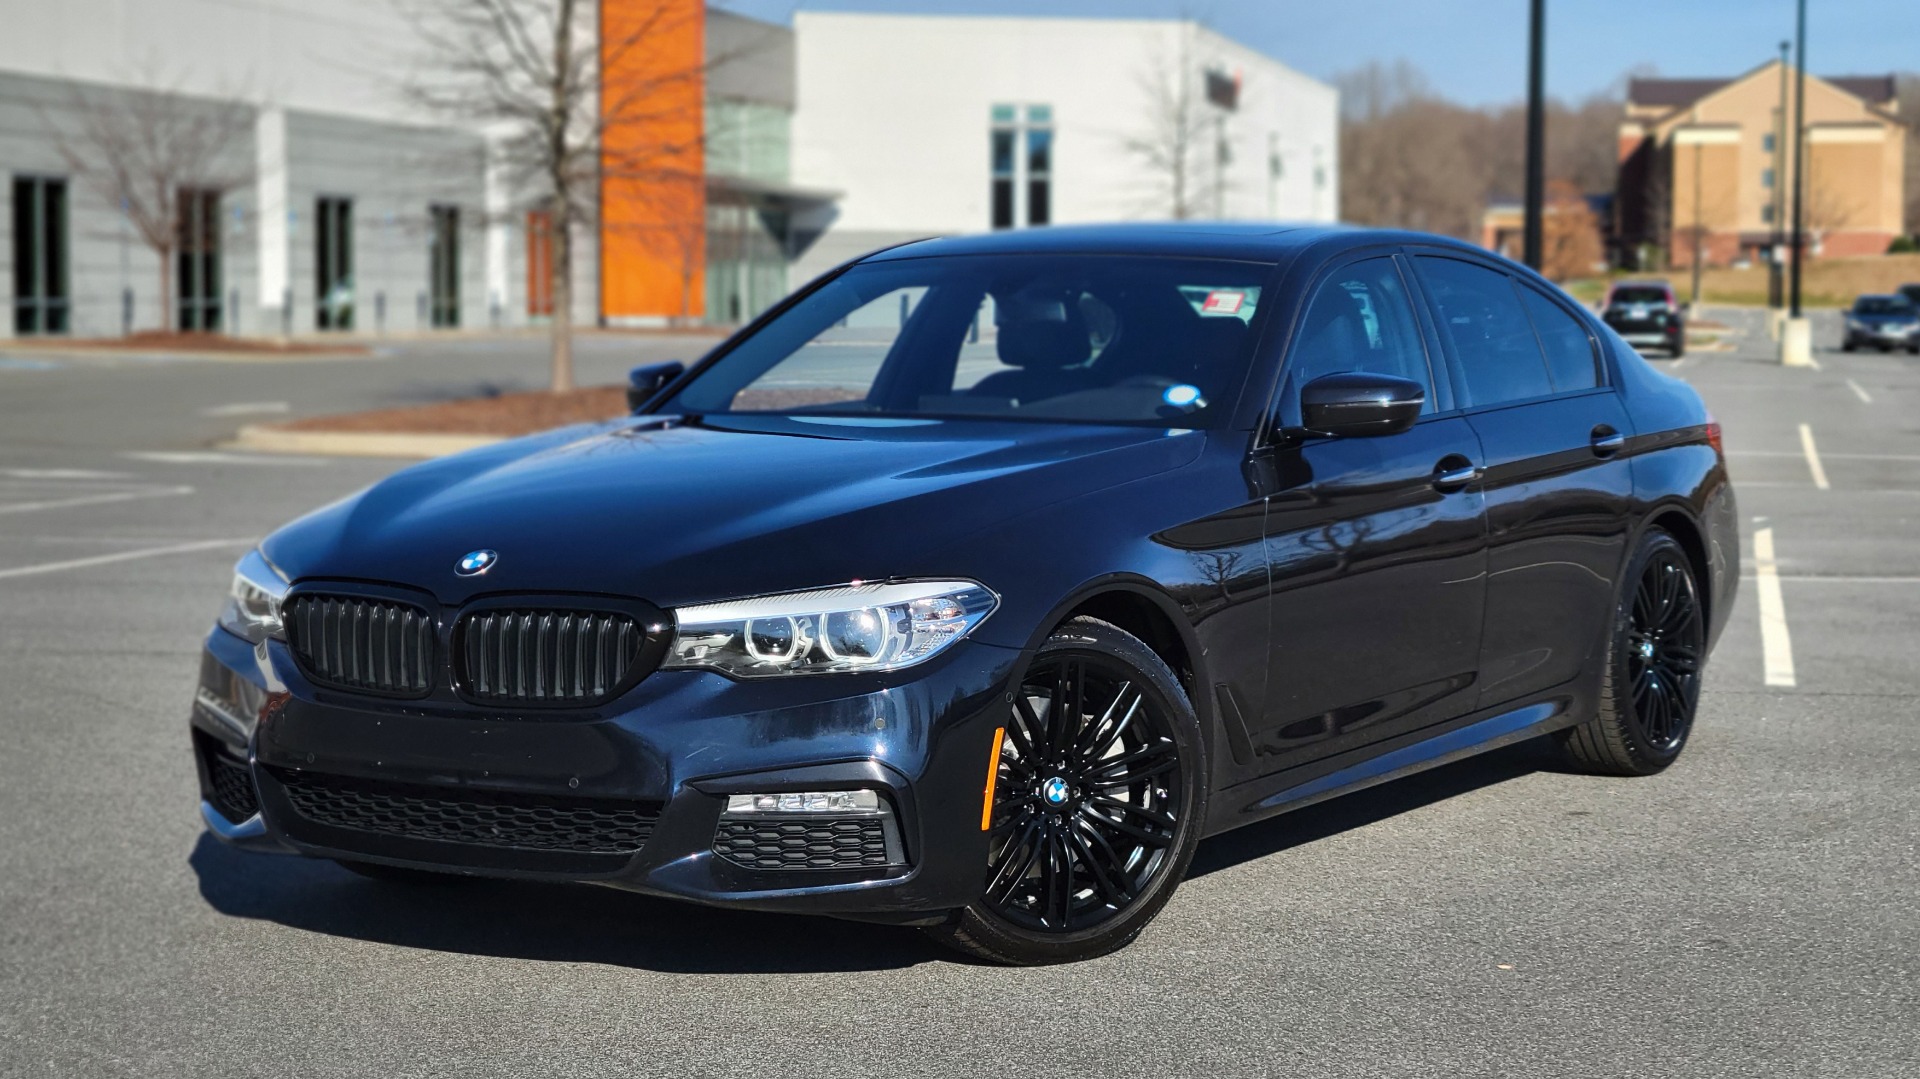 Used 2018 BMW 5 SERIES 540I XDRIVE 3.0L / M-SPORT / NAV / WIFI / SUNROOF /  REARVIEW For Sale ($40,795) | Formula Imports Stock #F11613